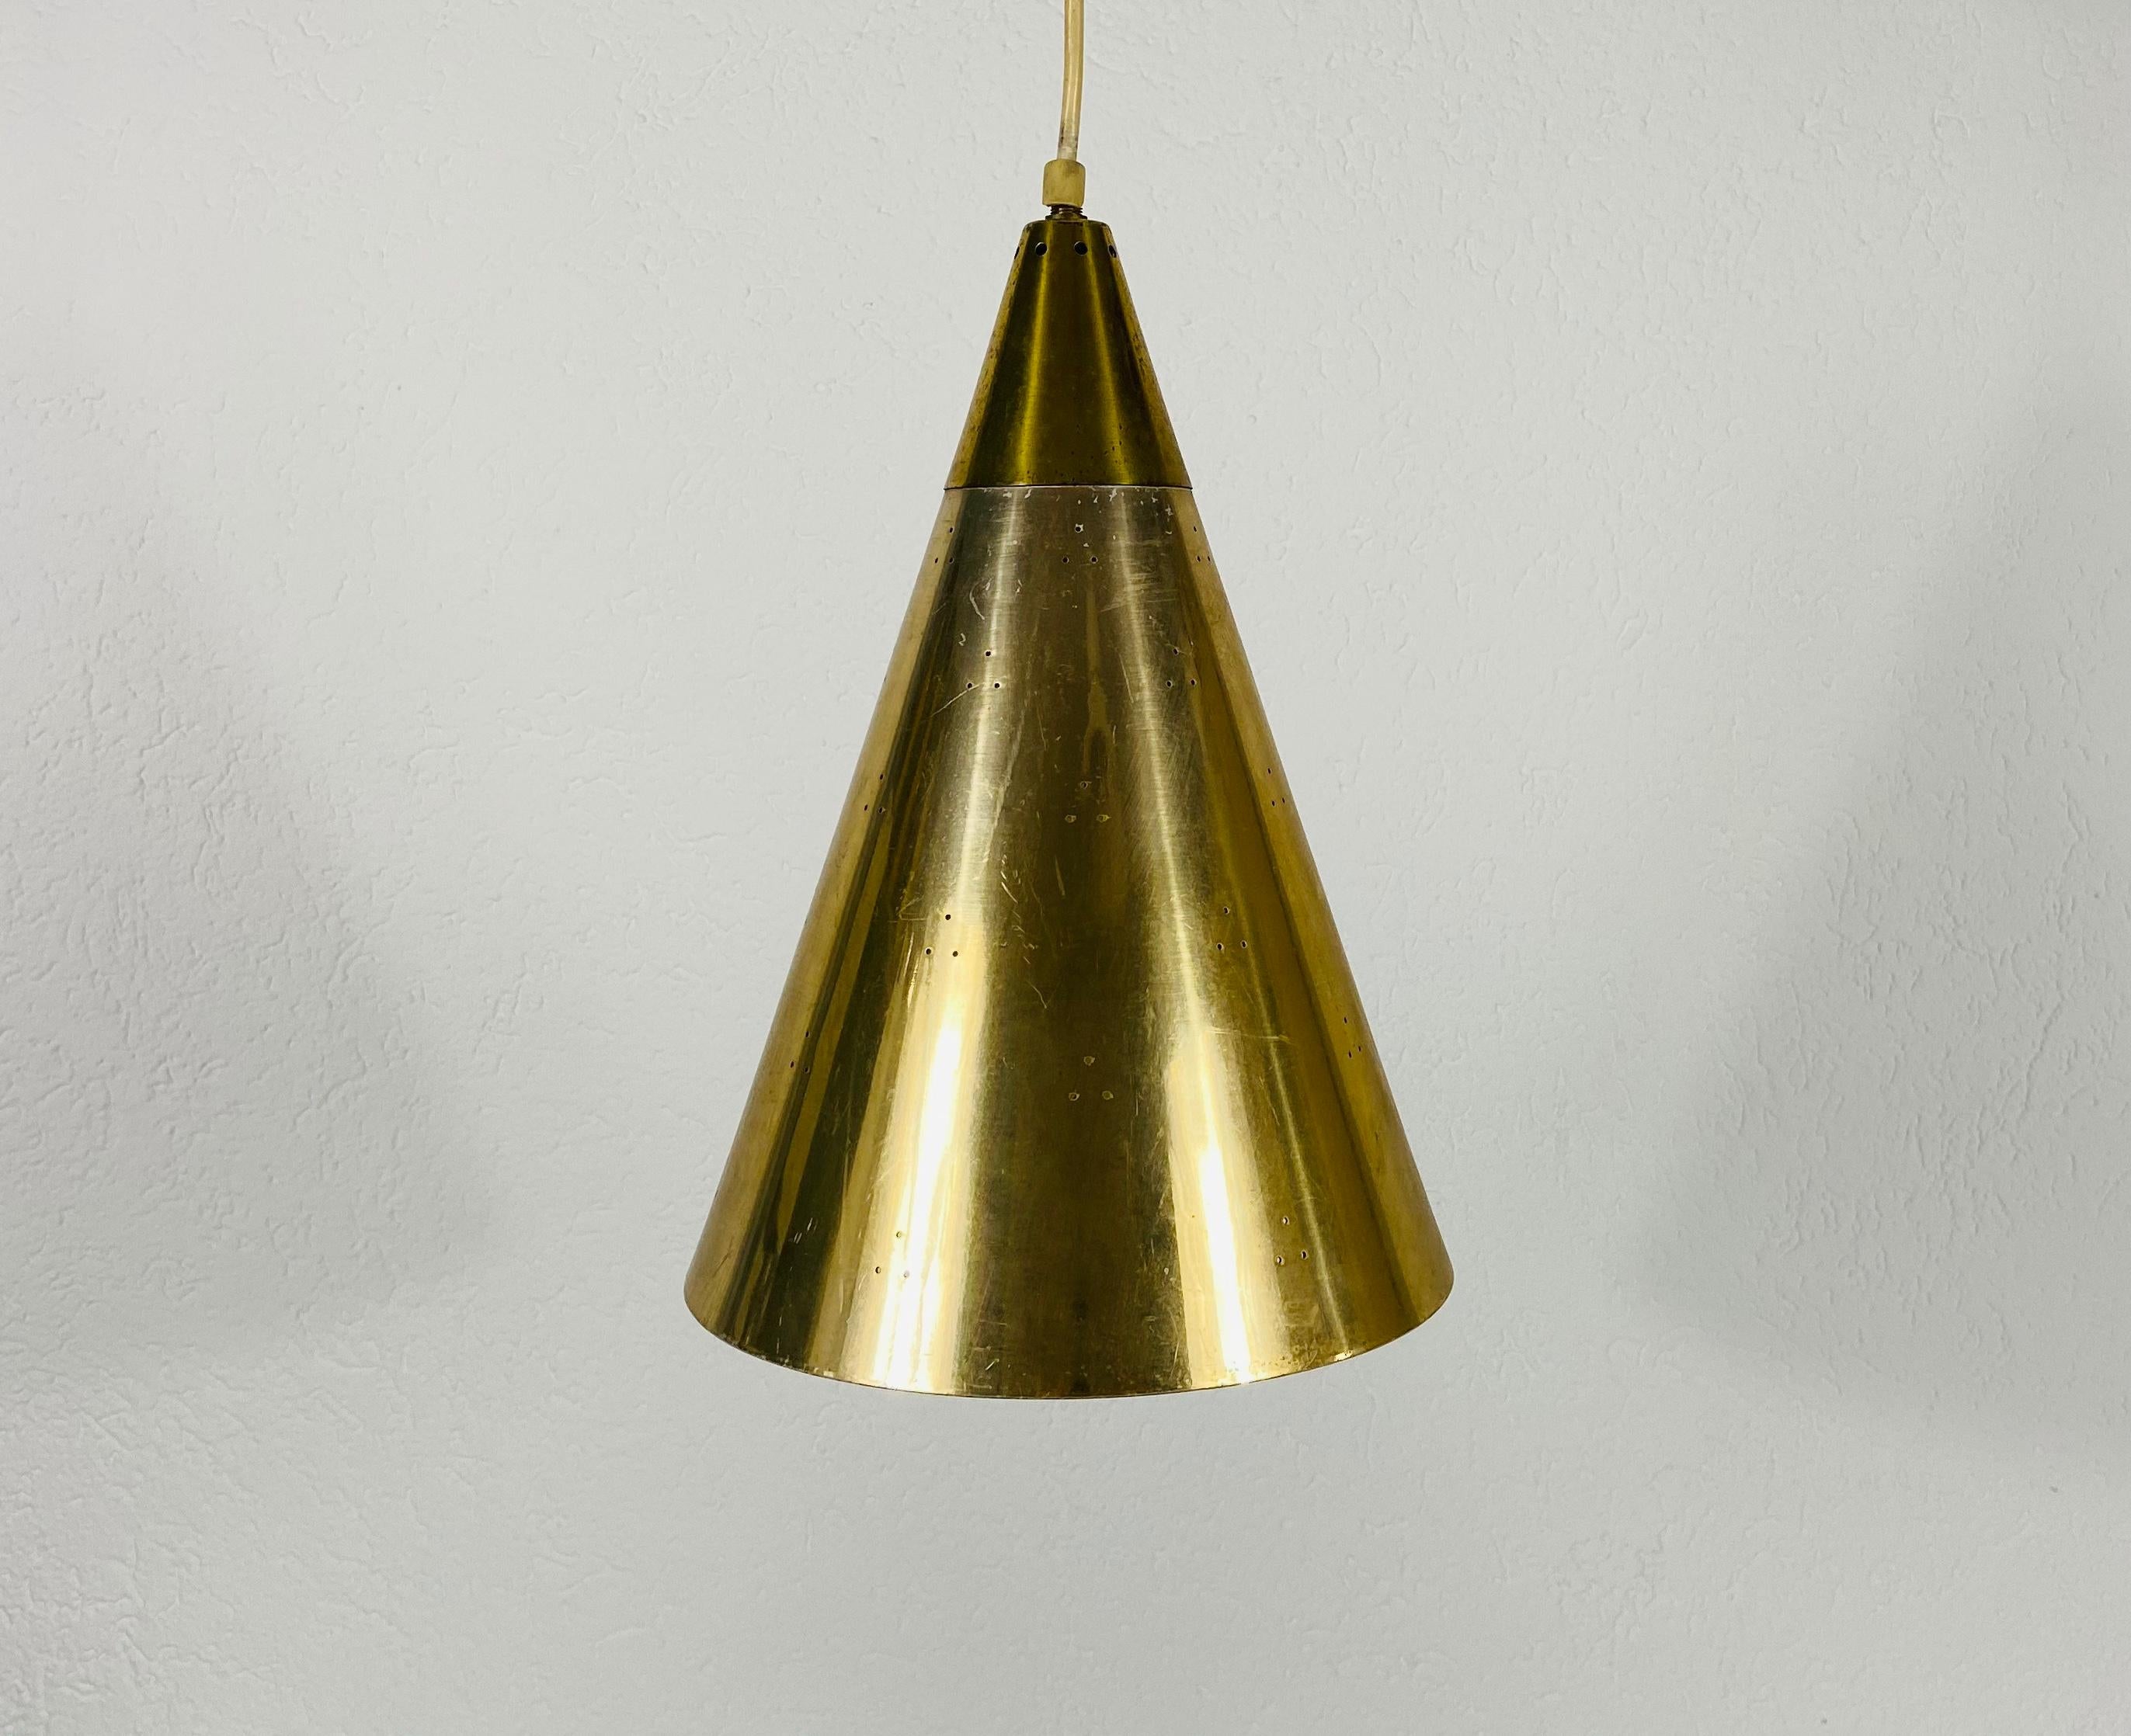 Very rare pendant lamp in the style of Paavo Tynell, made in Finland in the 1950s. The lighting is made of full of brass. It has many small holes which are creating beautiful light. The lighting requires one E27 light bulb.

Measures: Height of